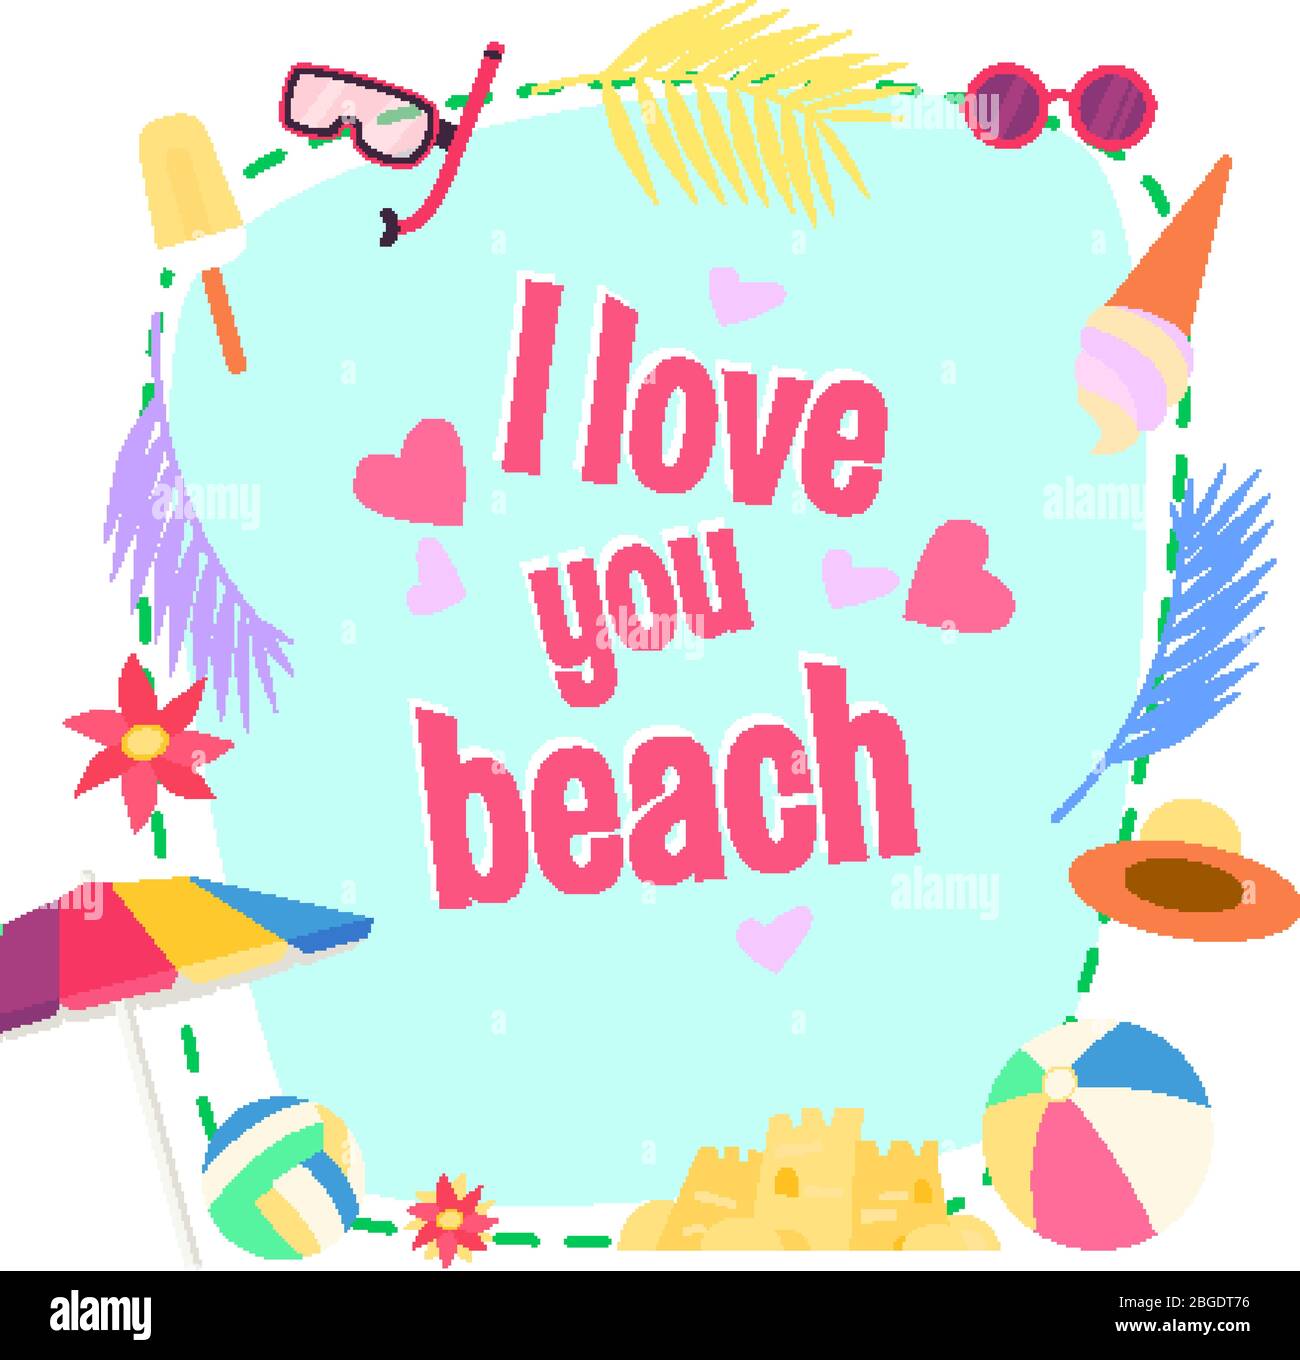 I love you beach. Summer background Stock Vector